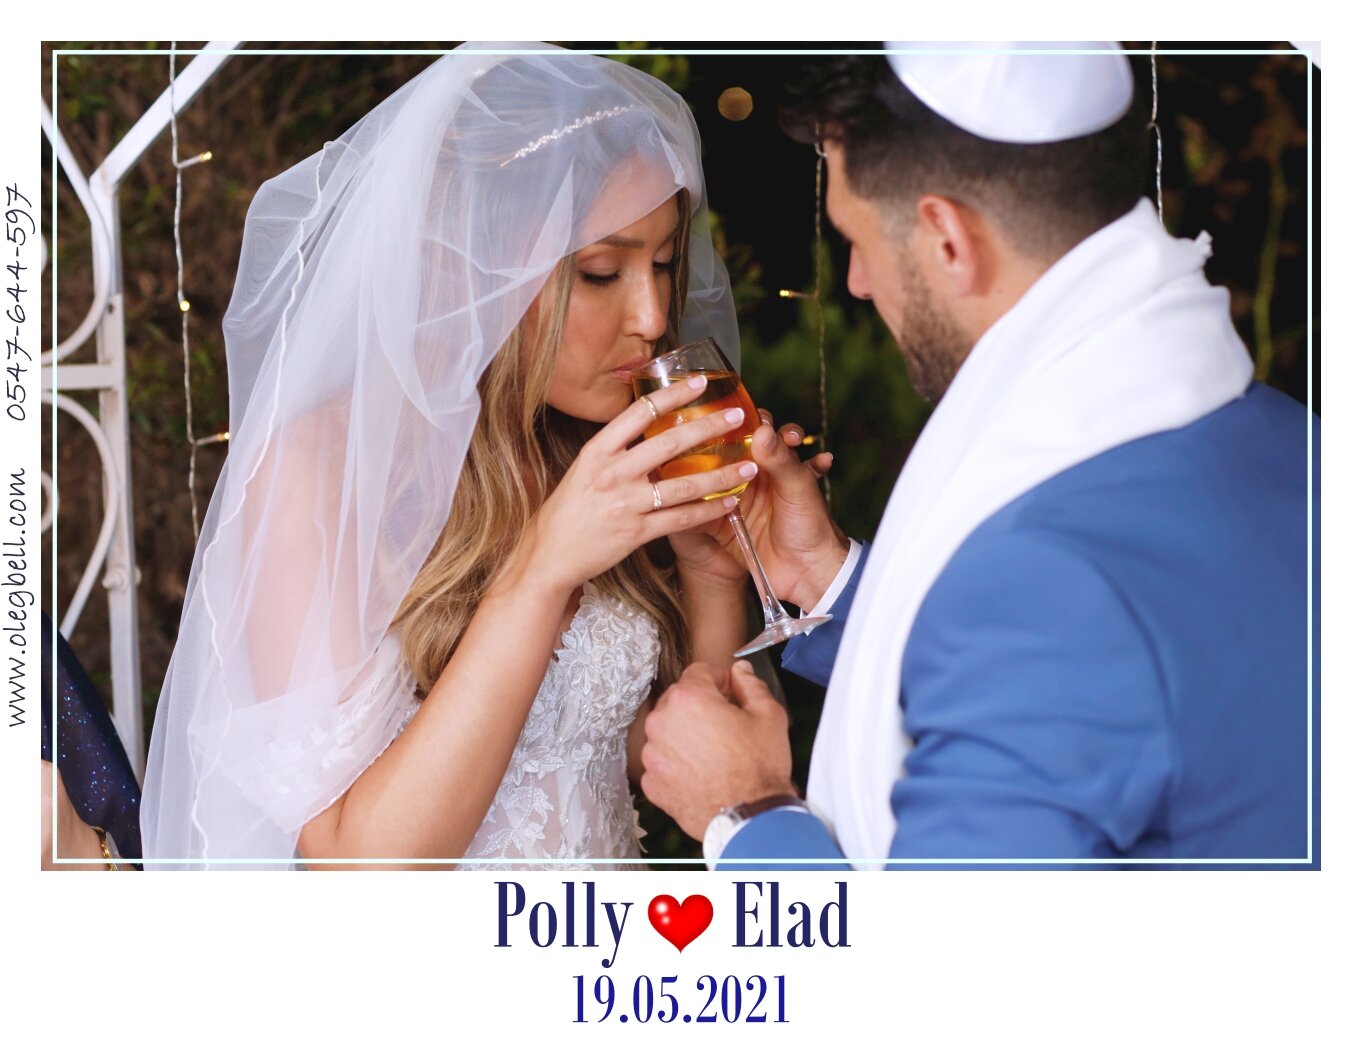 POLLY_AND_ELAD_WD_MG_SITE_025.JPG